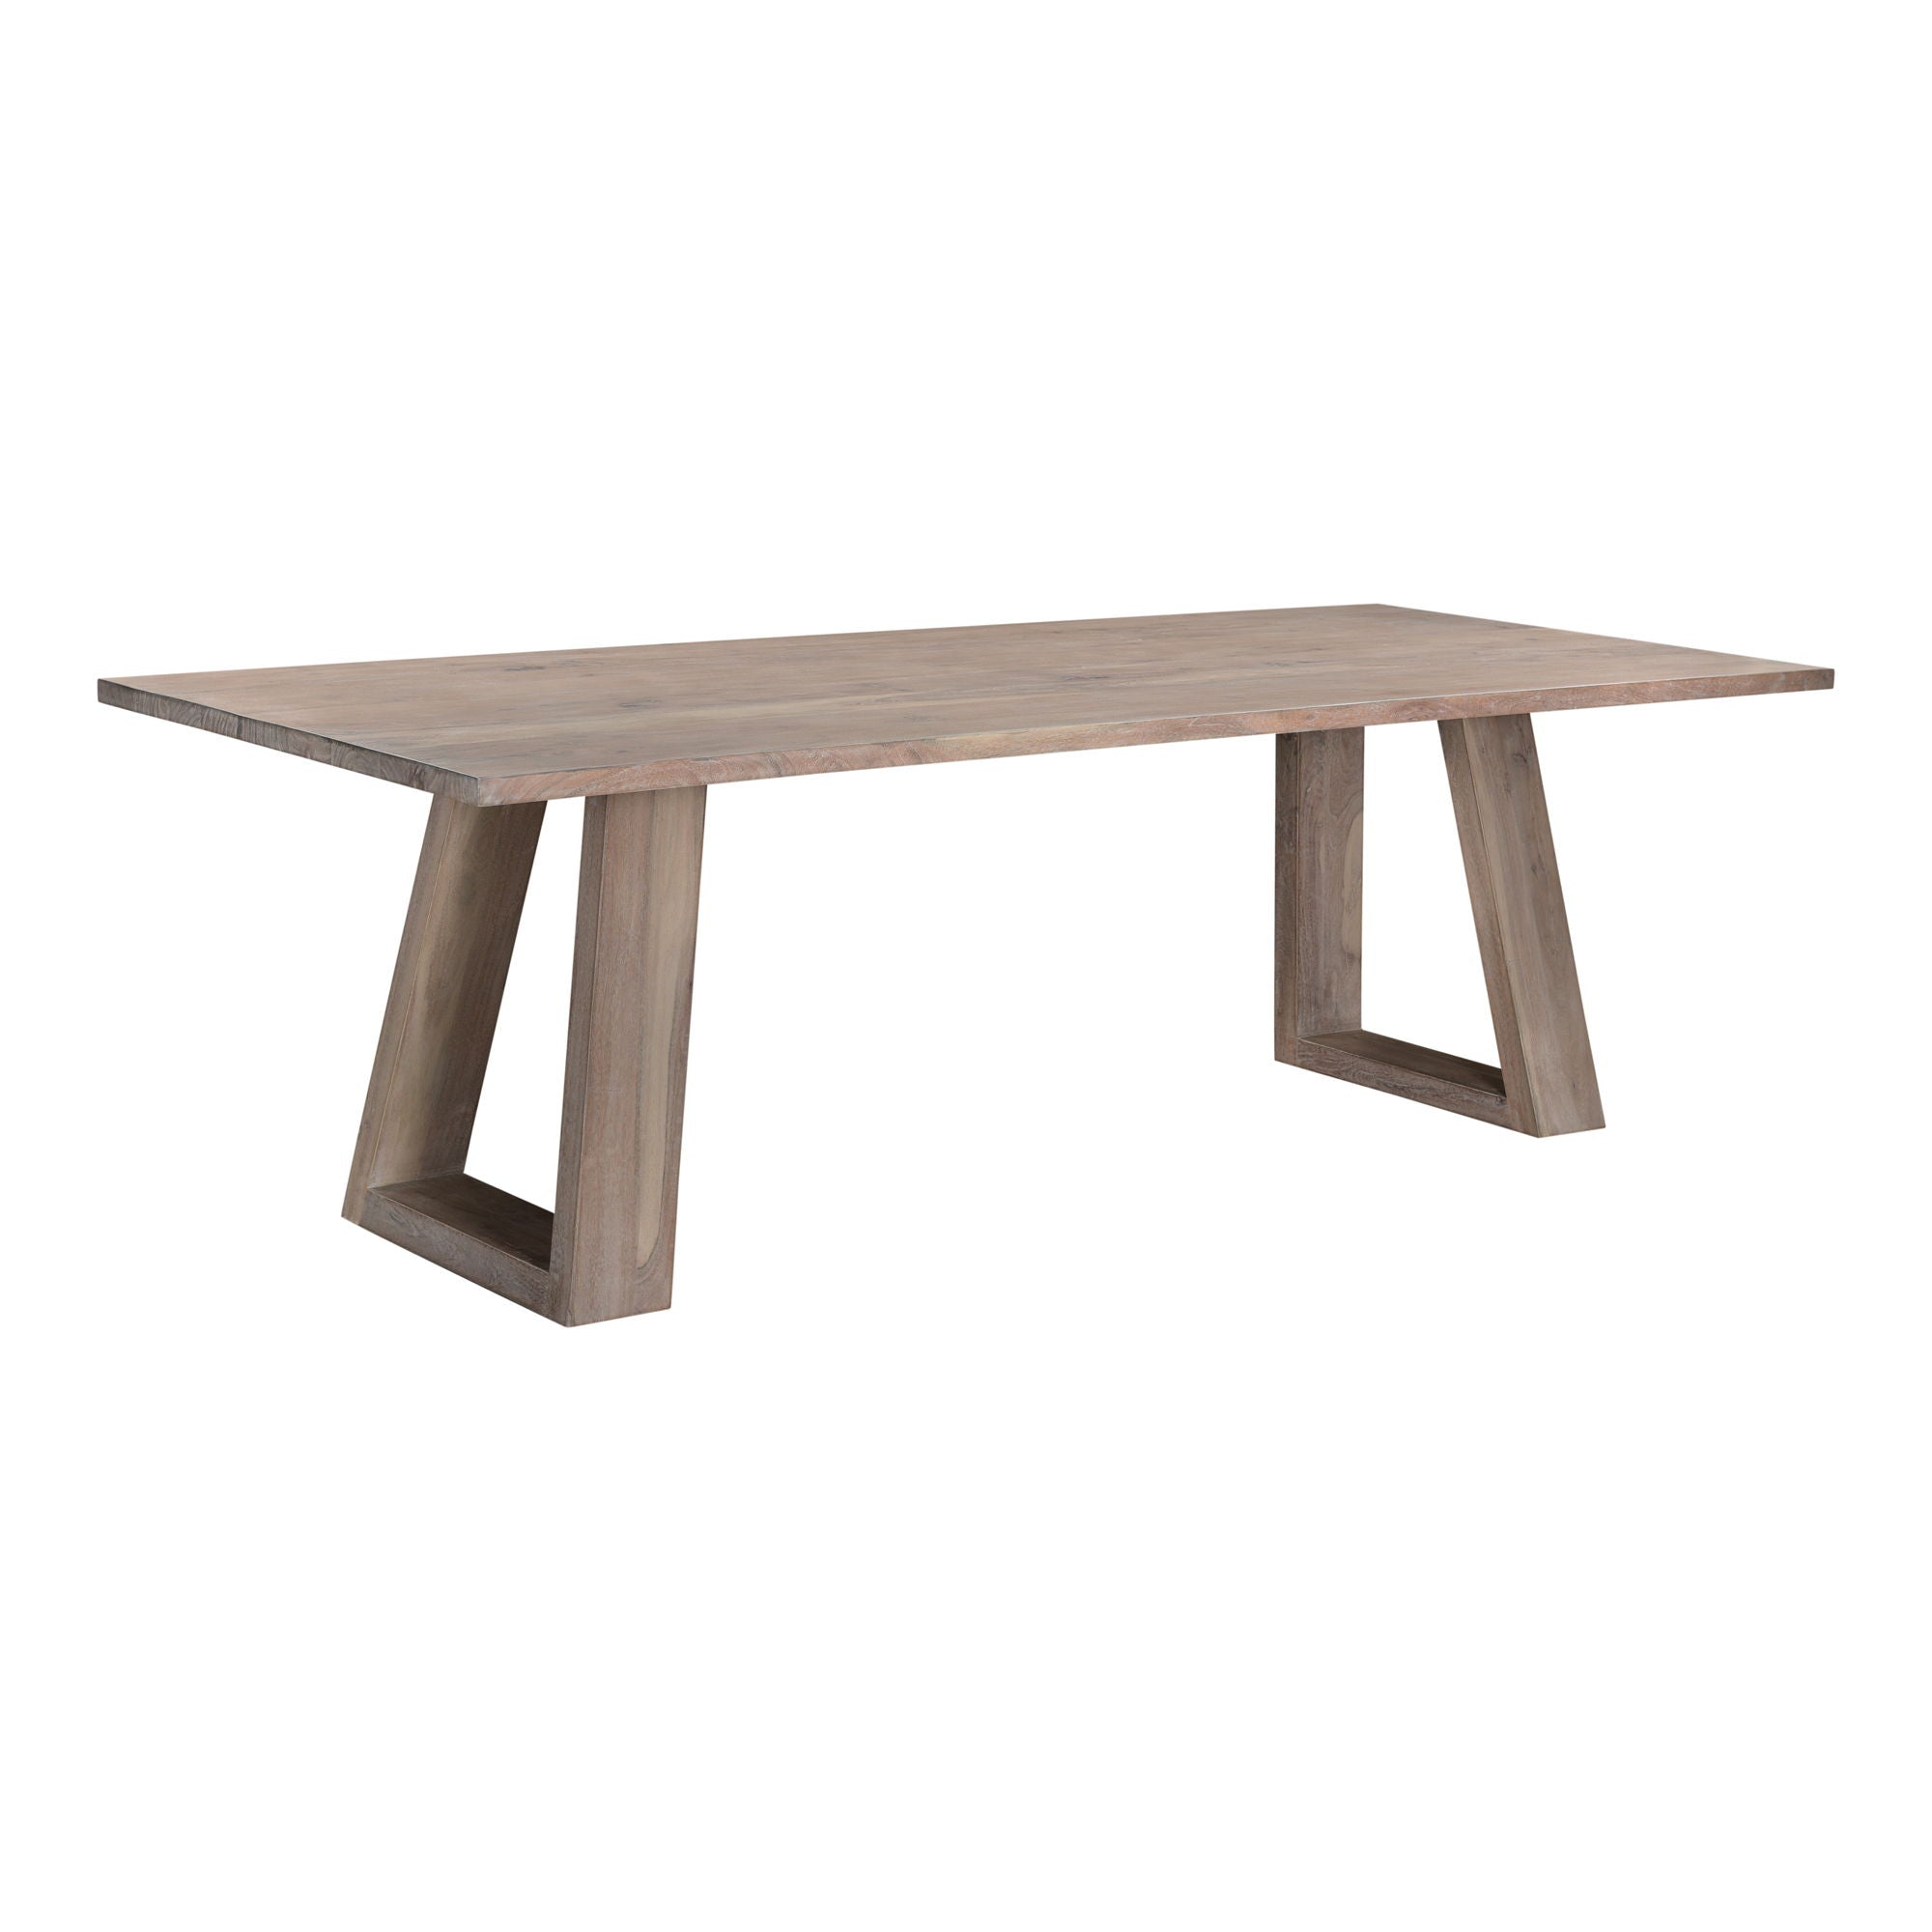 Tanya - Dining Table - White Wash